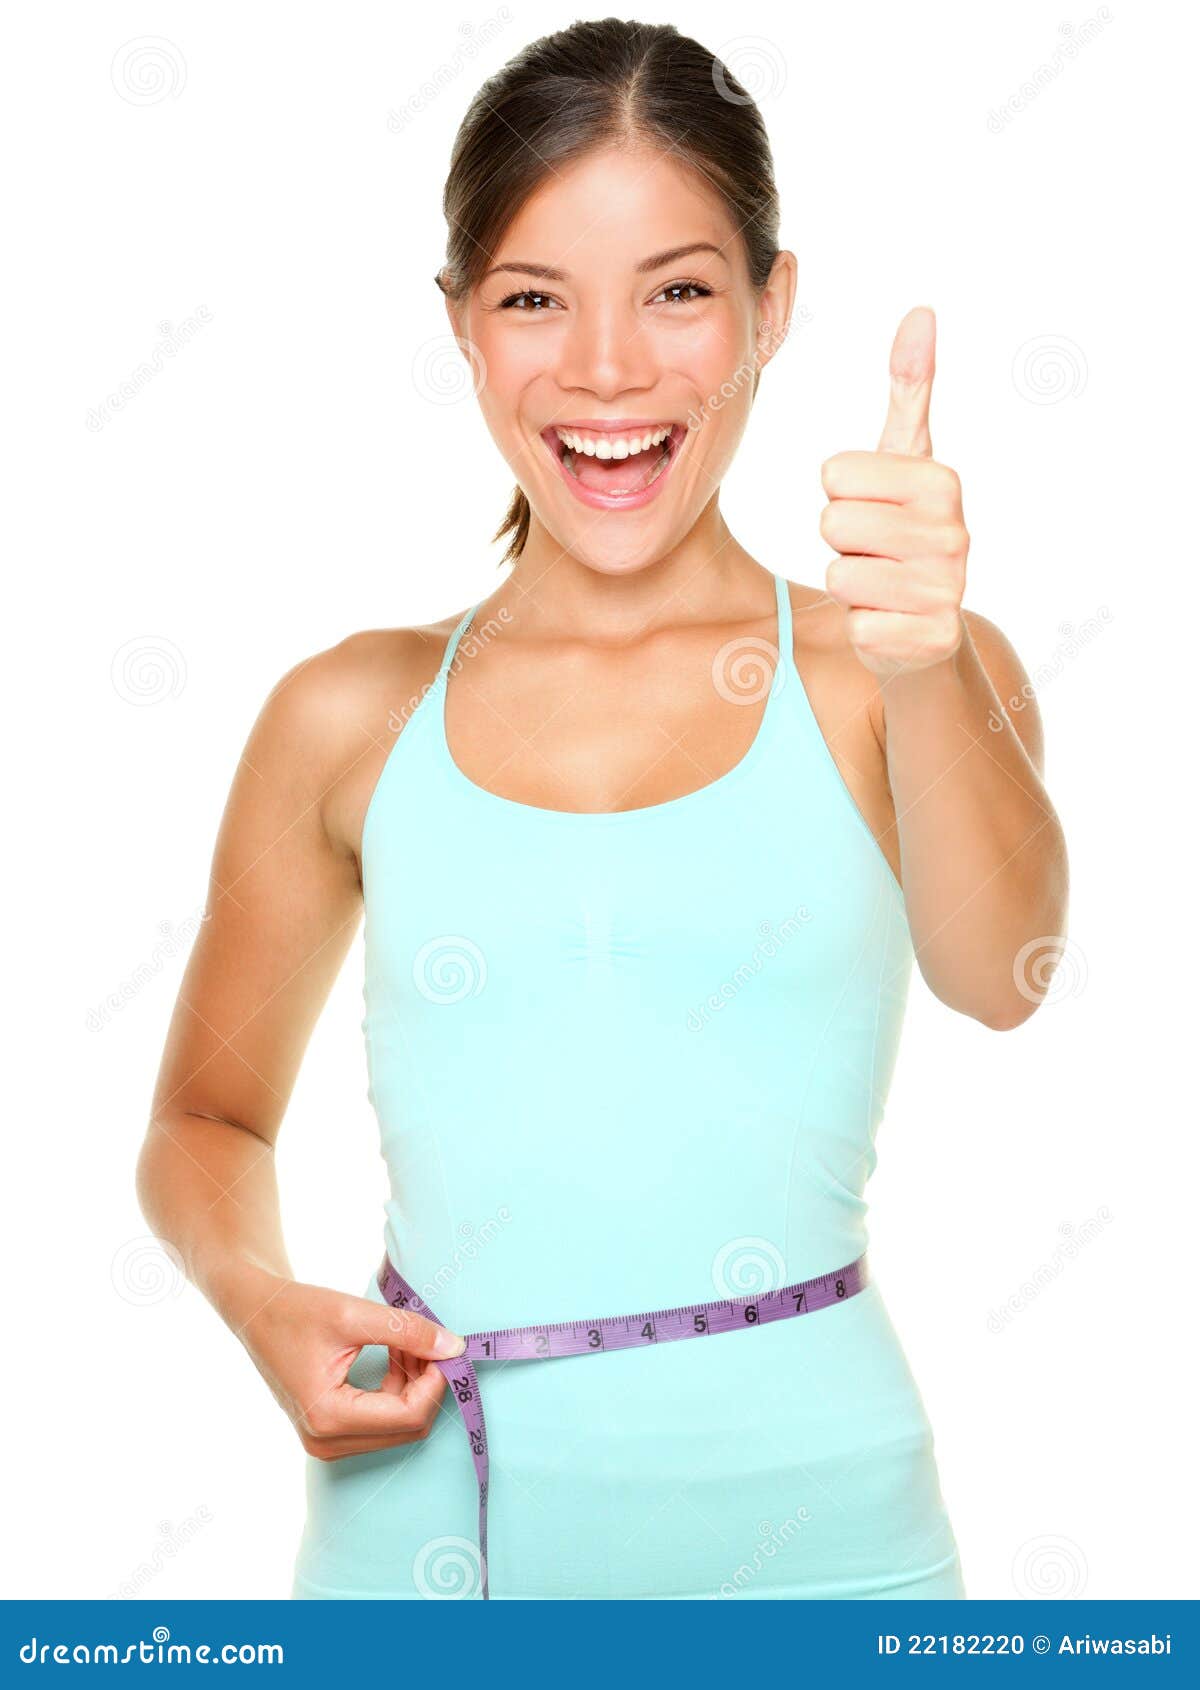 Weight loss stock photo. Image of casual, isolated 